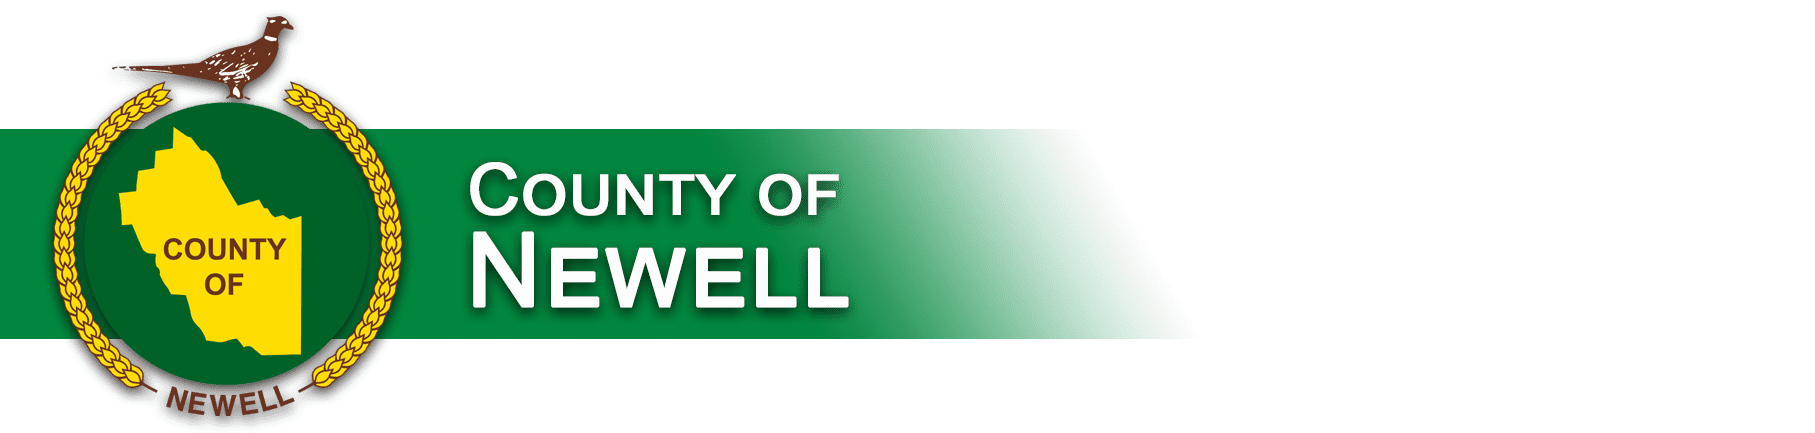 County of Newell